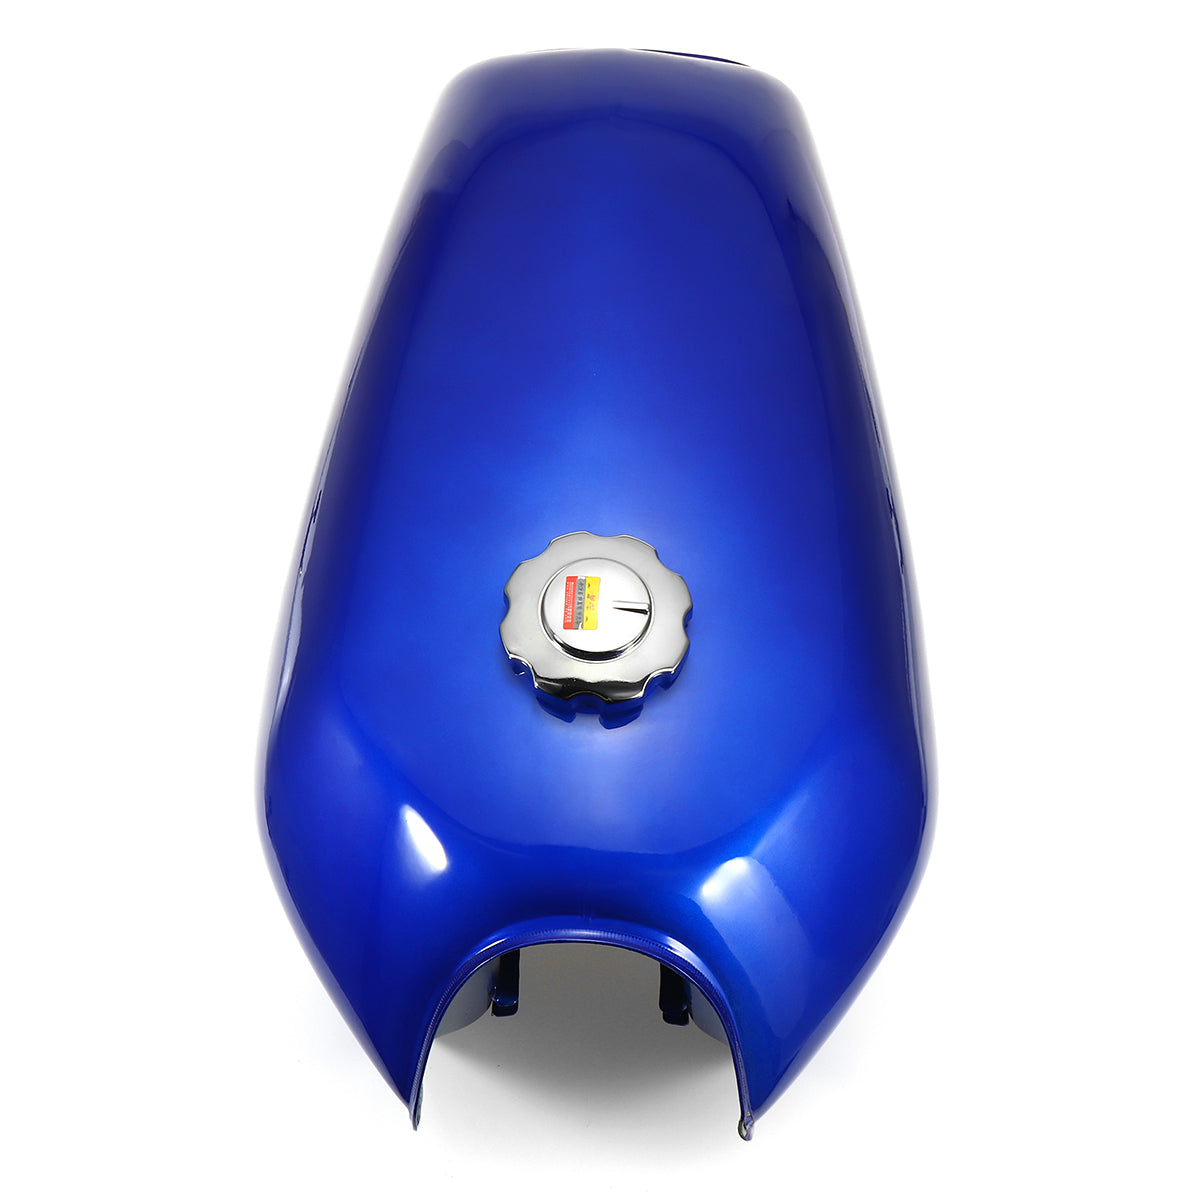 Royal Blue 9L 2.4 Gallon Motorcycle Cafe Racer Fuel Gas Tank with Petrol Cap Key For Honda CG125